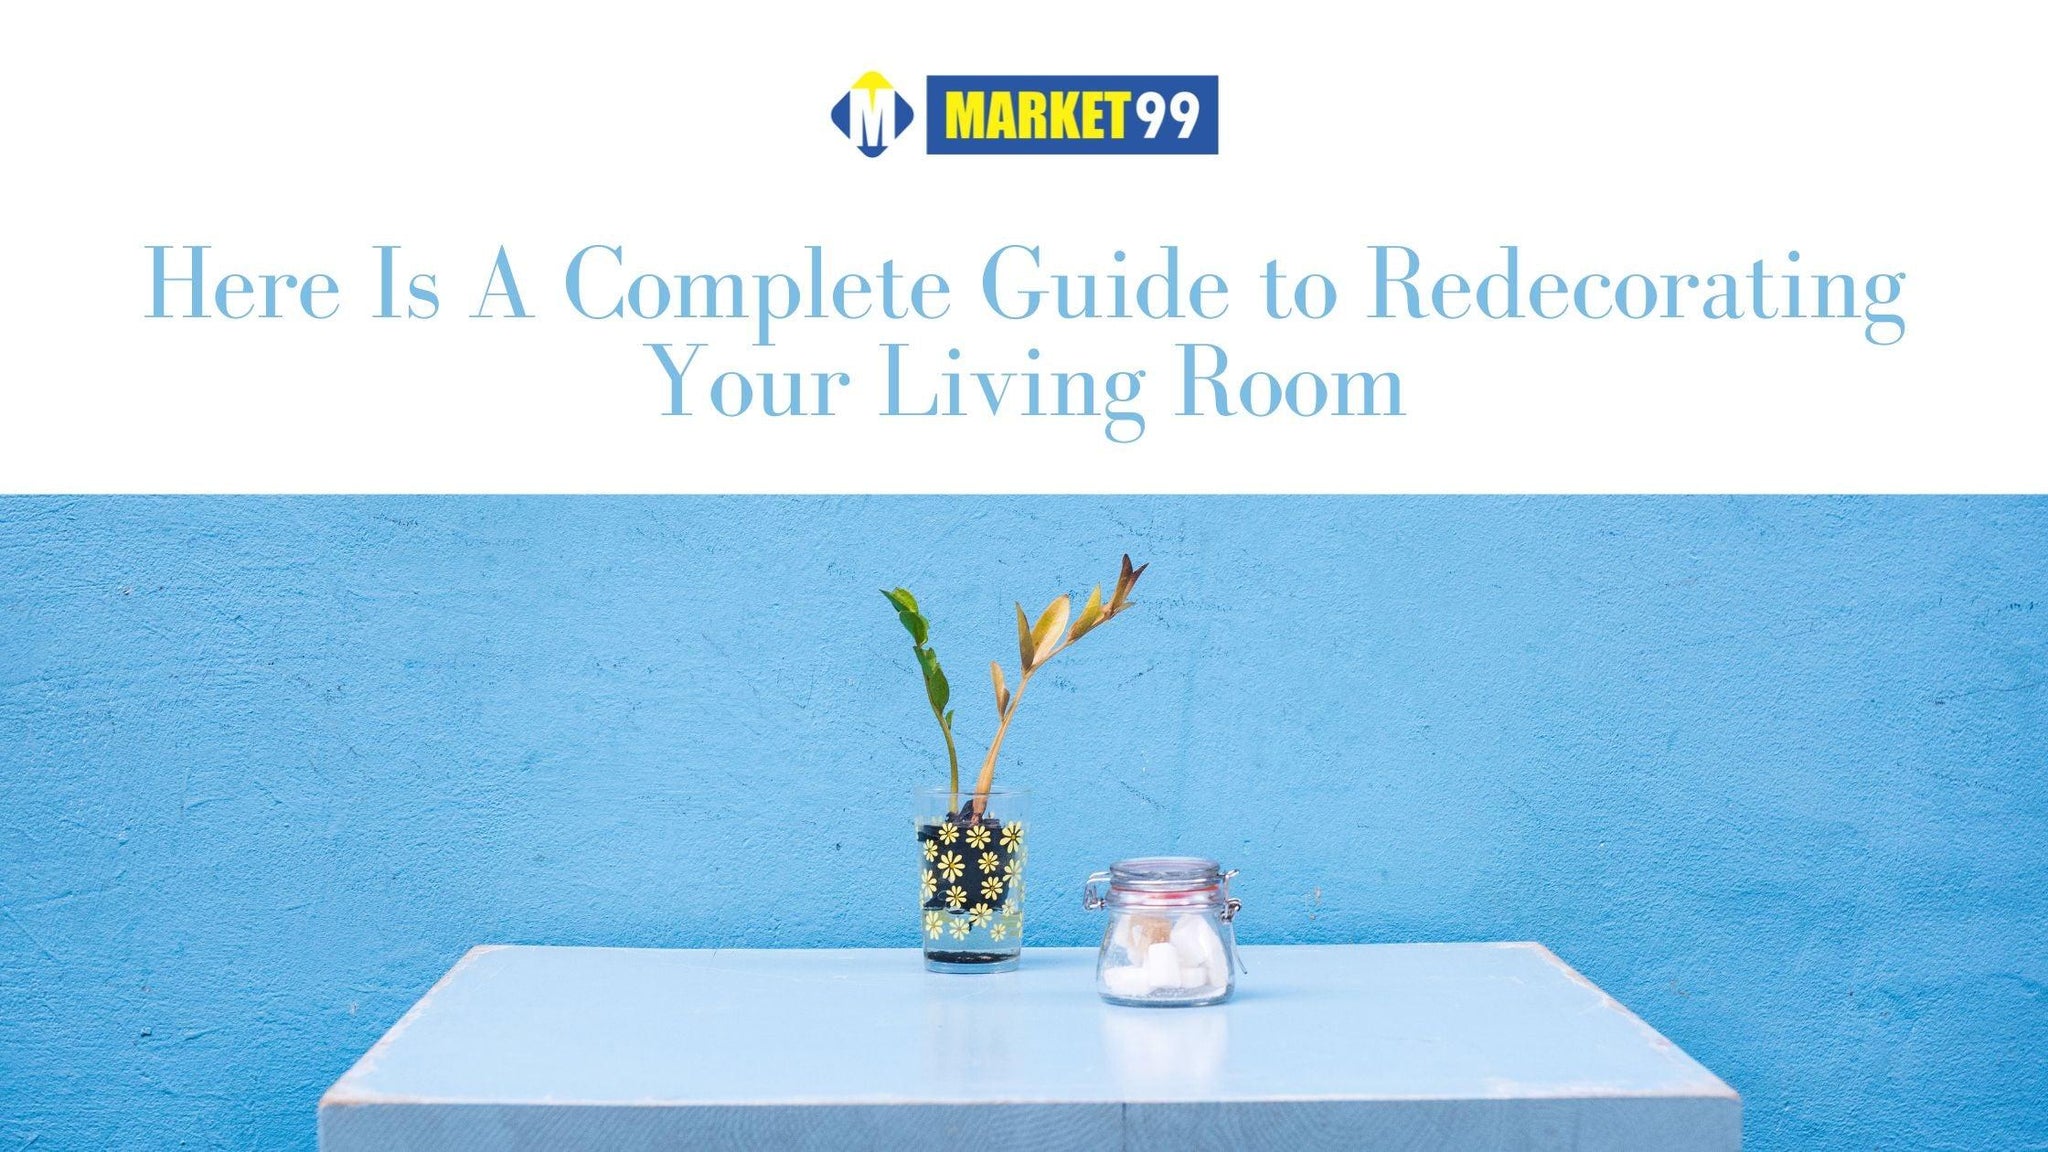 Here Is A Complete Guide to Redecorating Your Living Room - MARKET 99